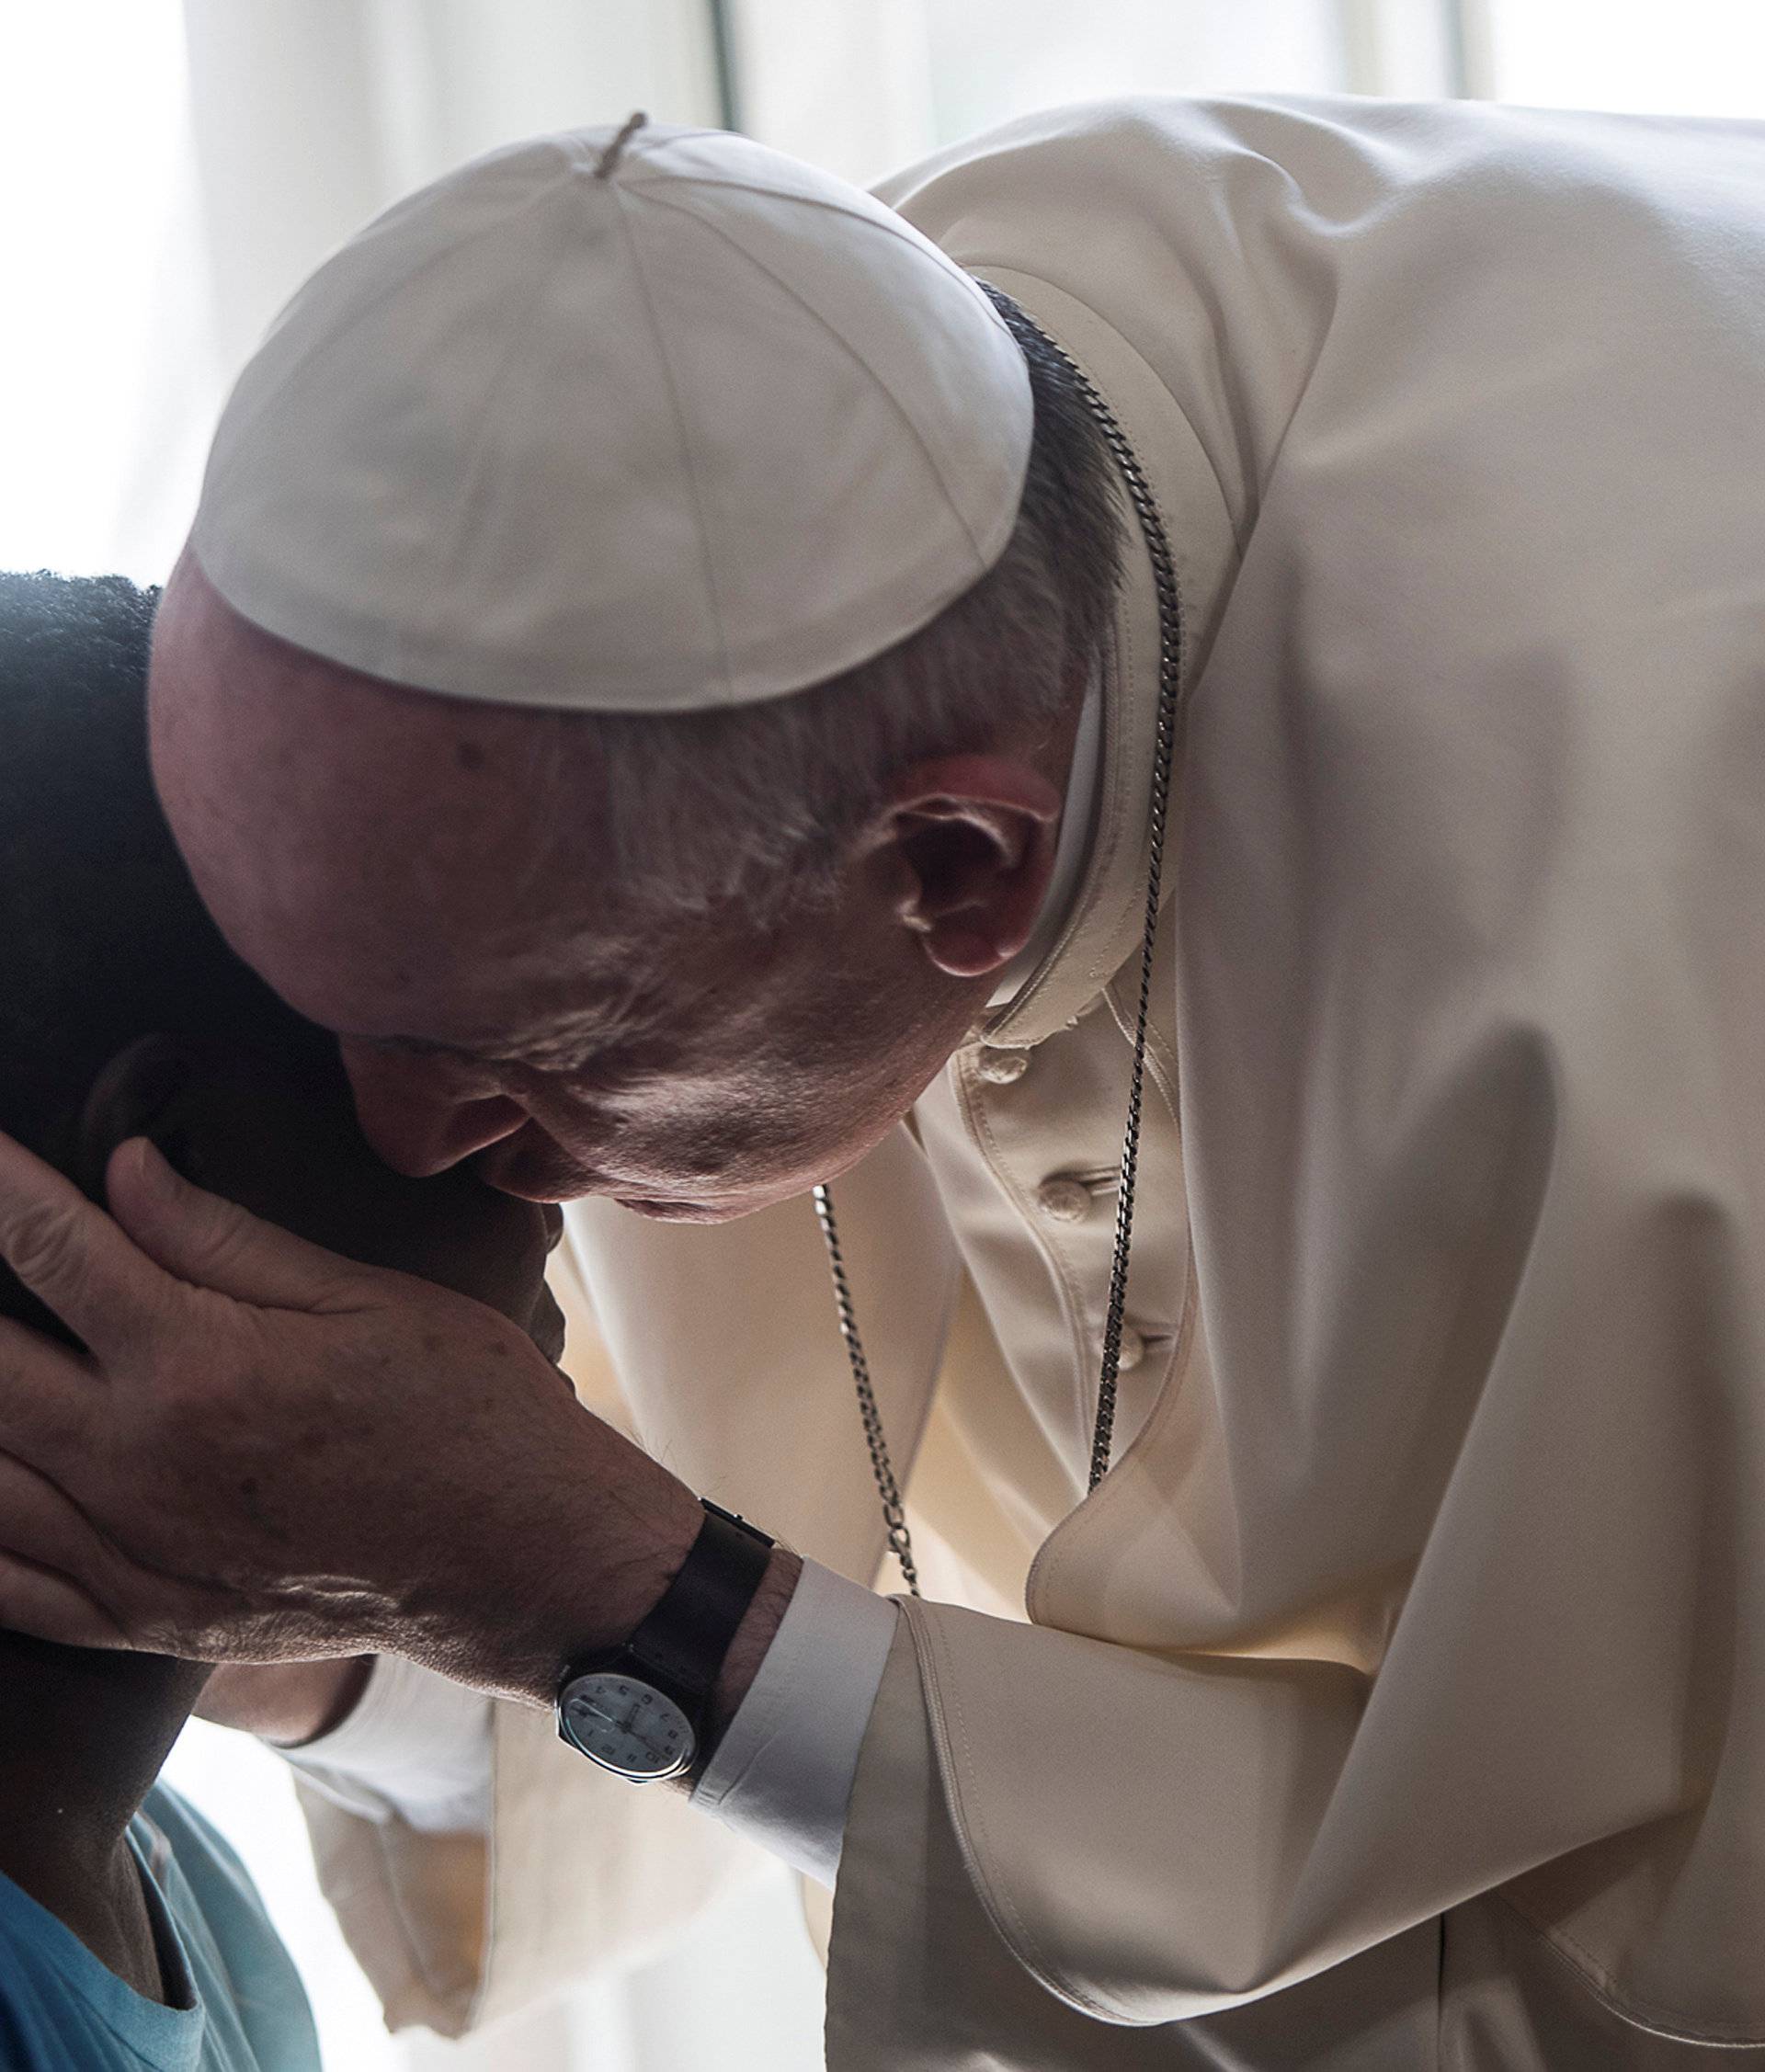 Pope Francis kisses a member of the Pope John XXIII community in Rome